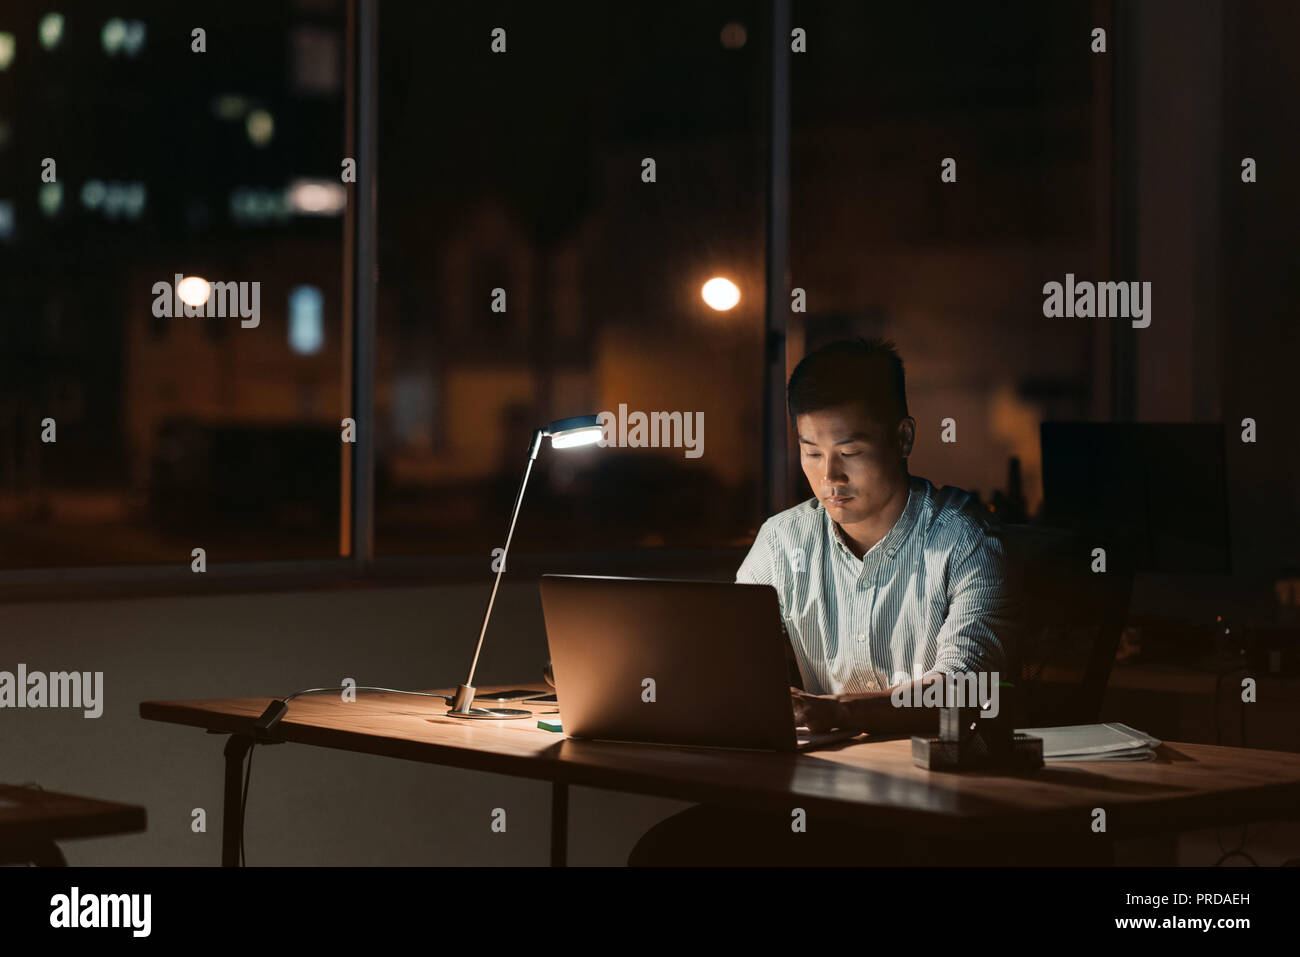 Asian businessman working alone in a dark office at night Stock Photo